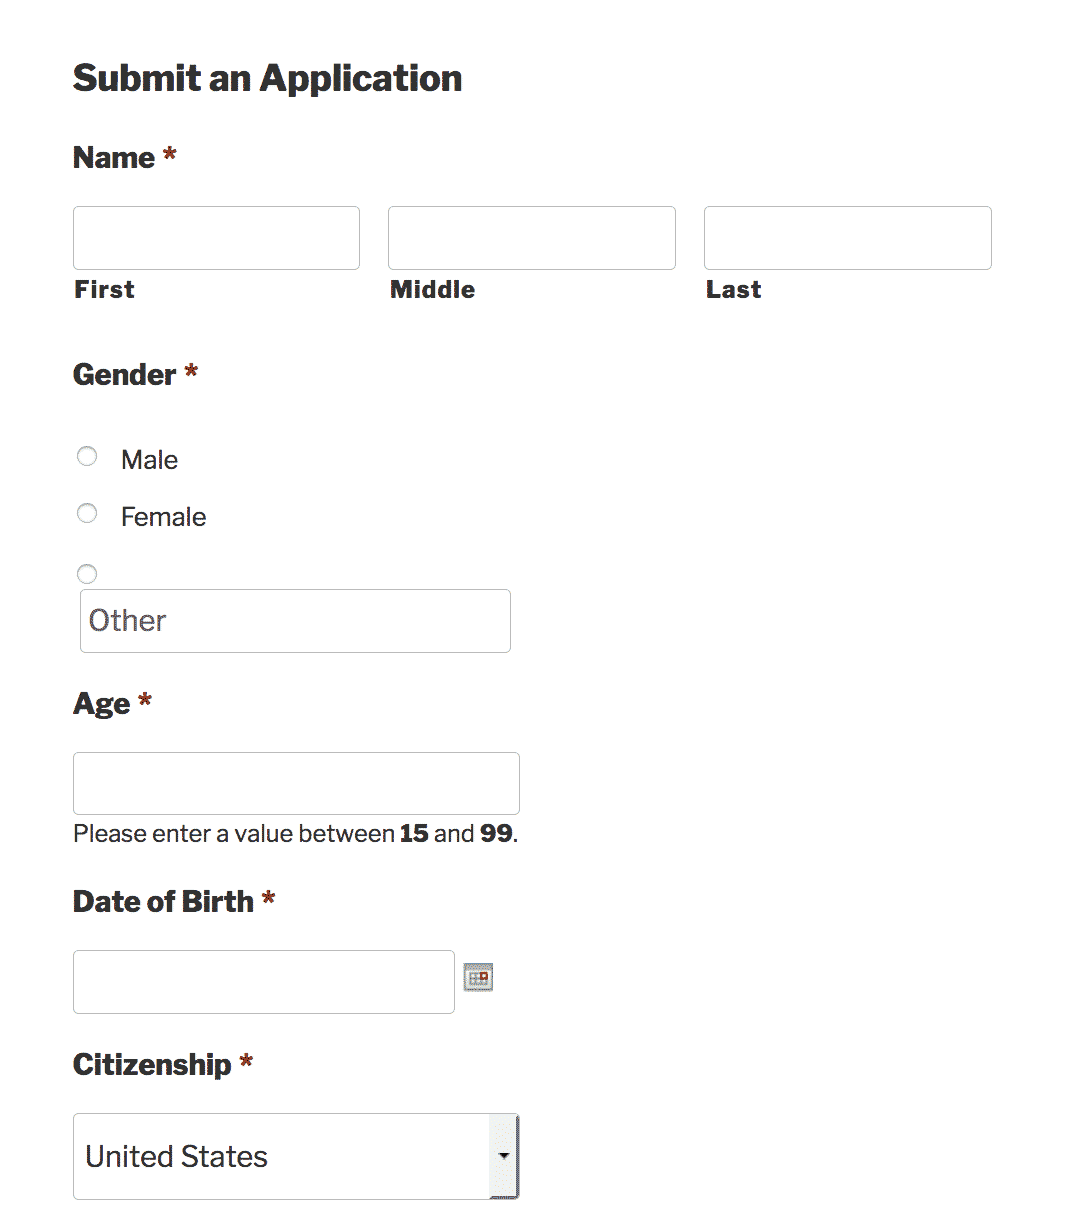 Submit application